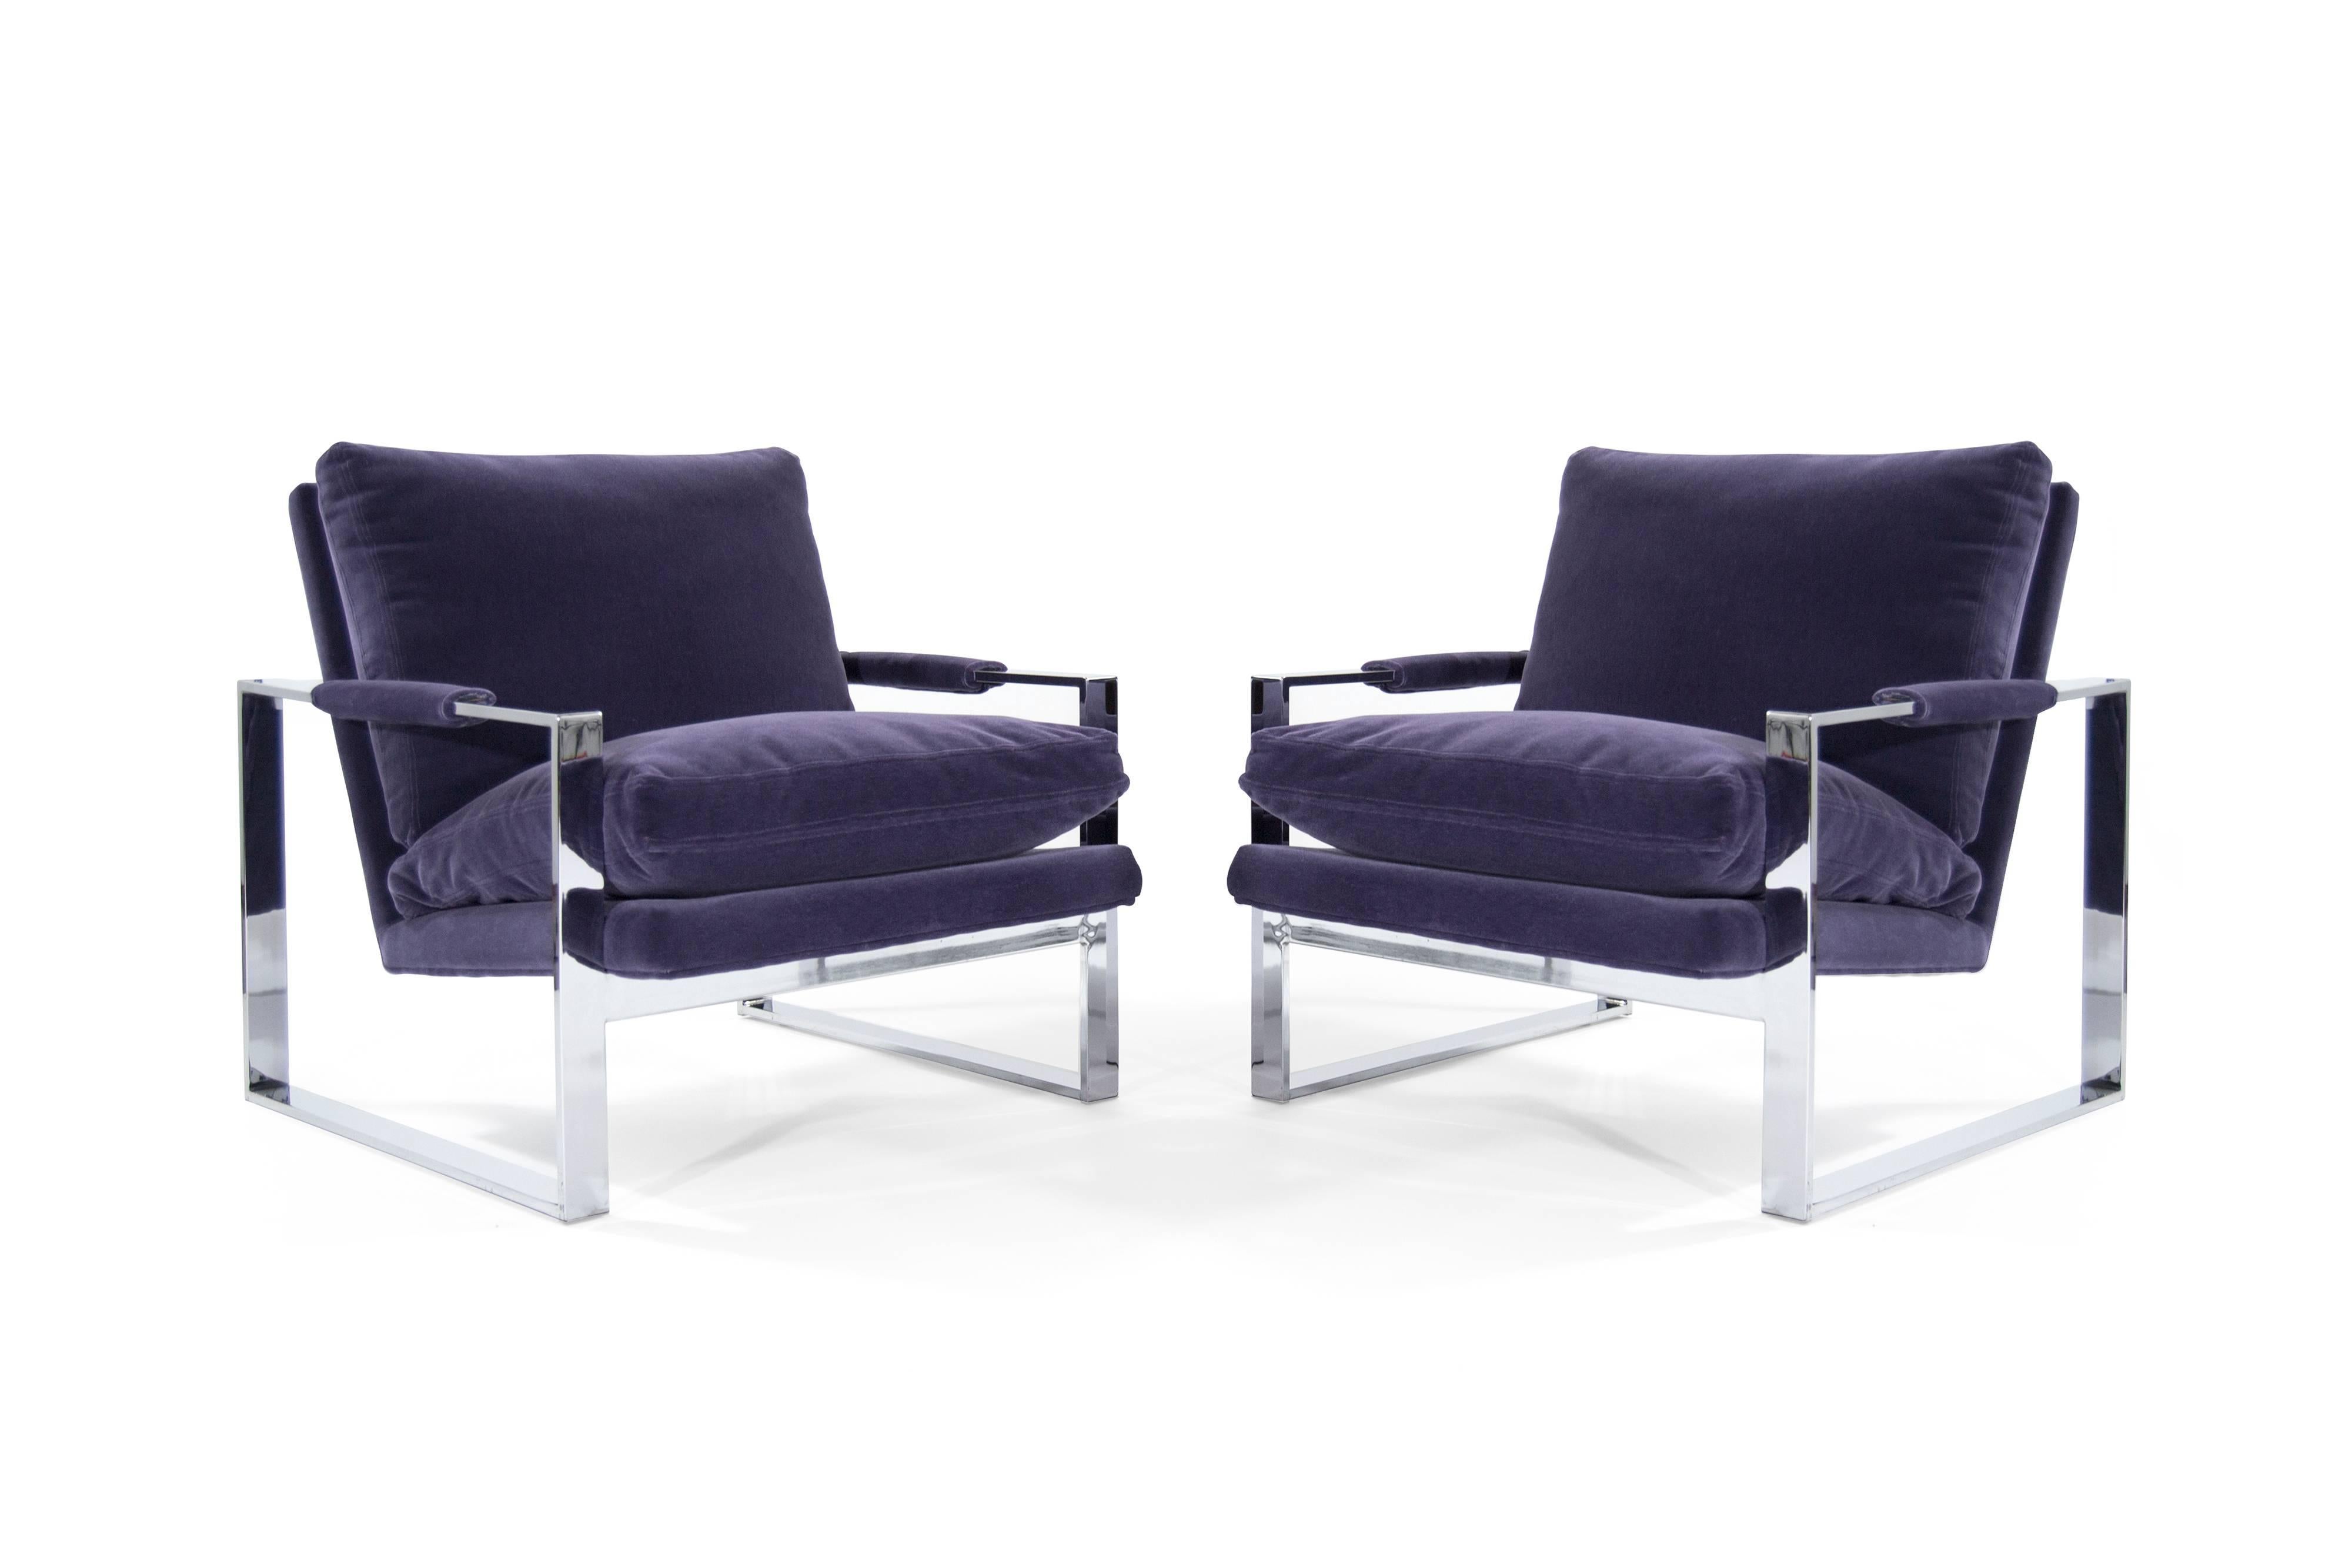 Pair of lounge chairs designed by Milo Baughman for Thayer Coggin newly recovered in purple mohair.

Chrome frames in perfect condition, no chips, discoloration or rust.